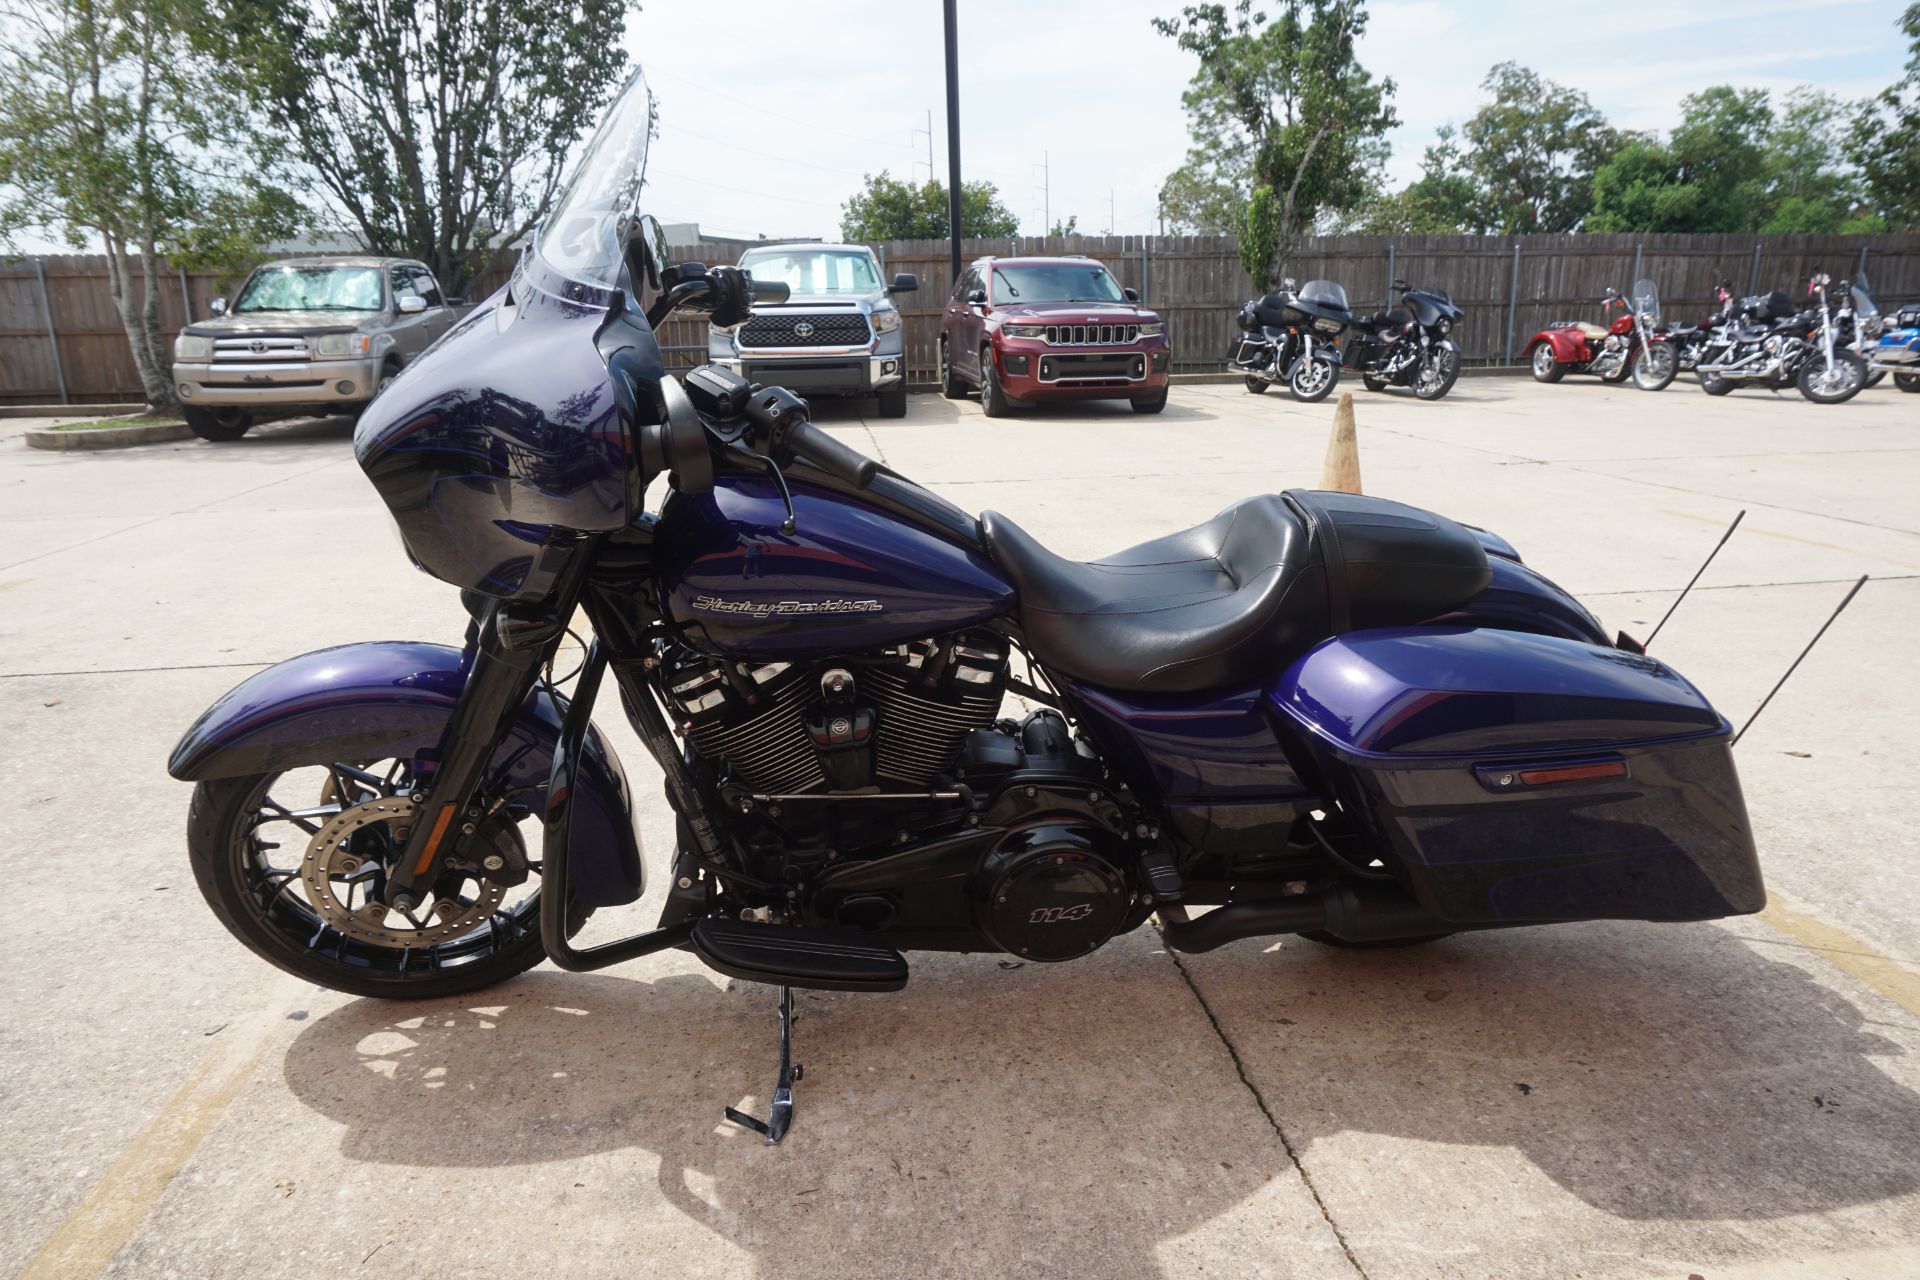 2020 Harley-Davidson Street Glide® Special in Metairie, Louisiana - Photo 15